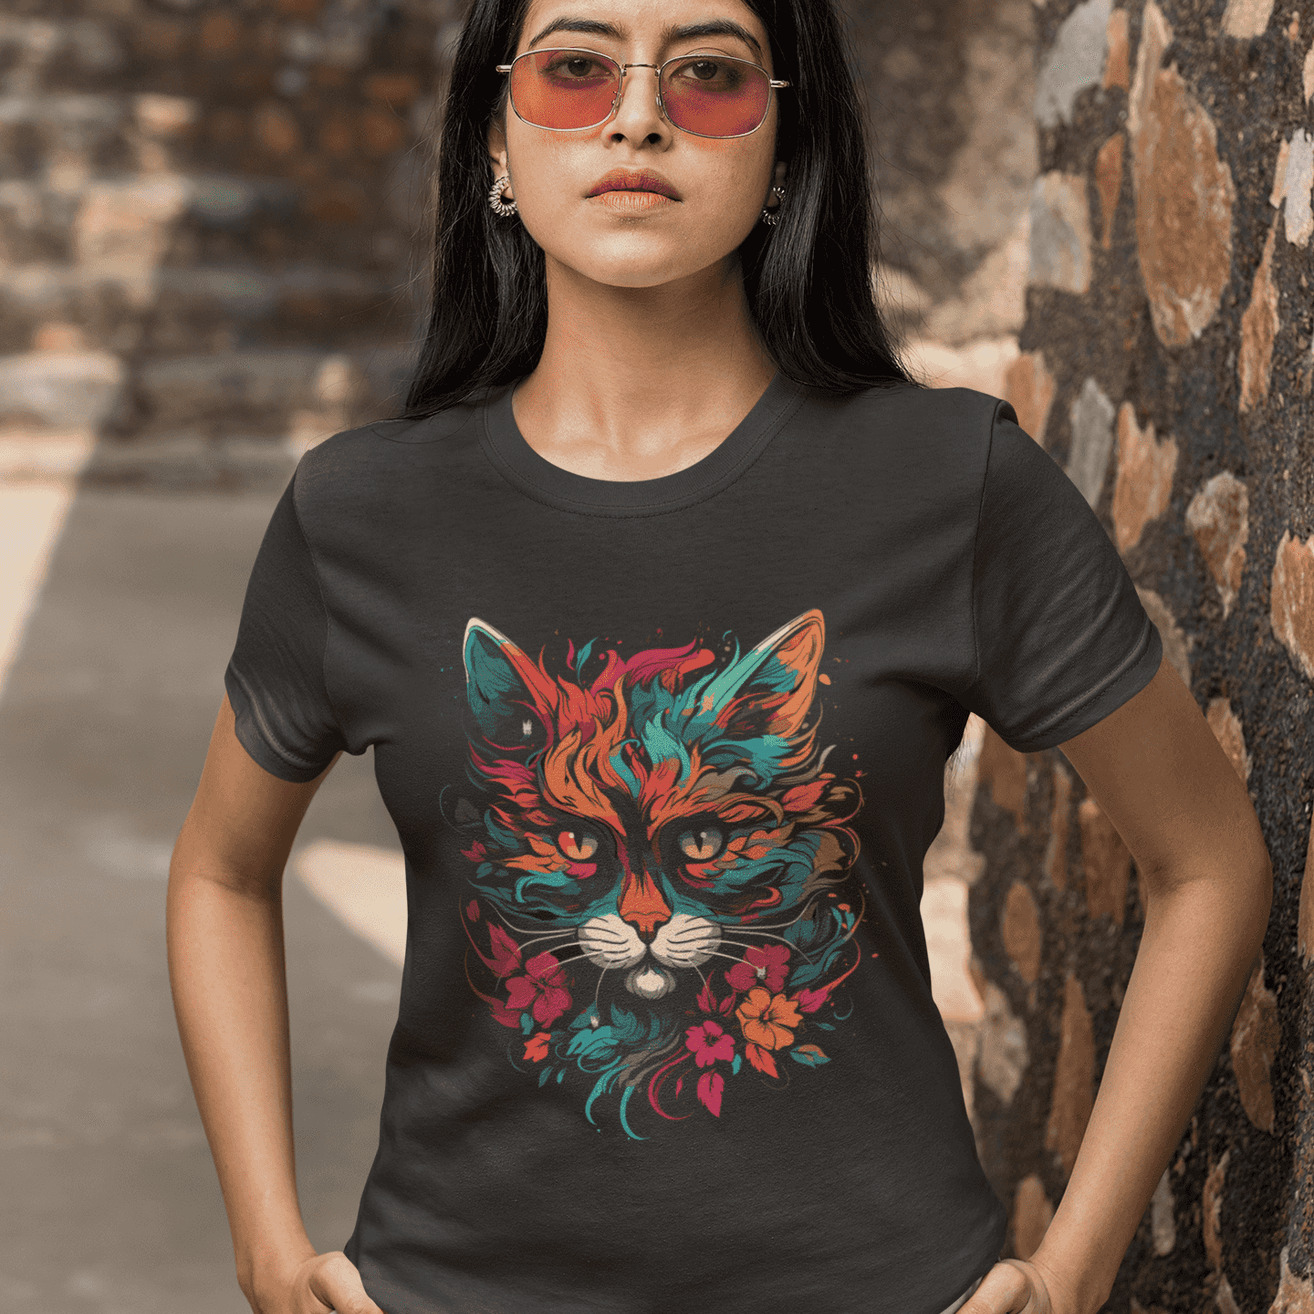 Women's Colorful Cat design T-Shirt - Purr-fectly Playful for cat lovers| Storeily